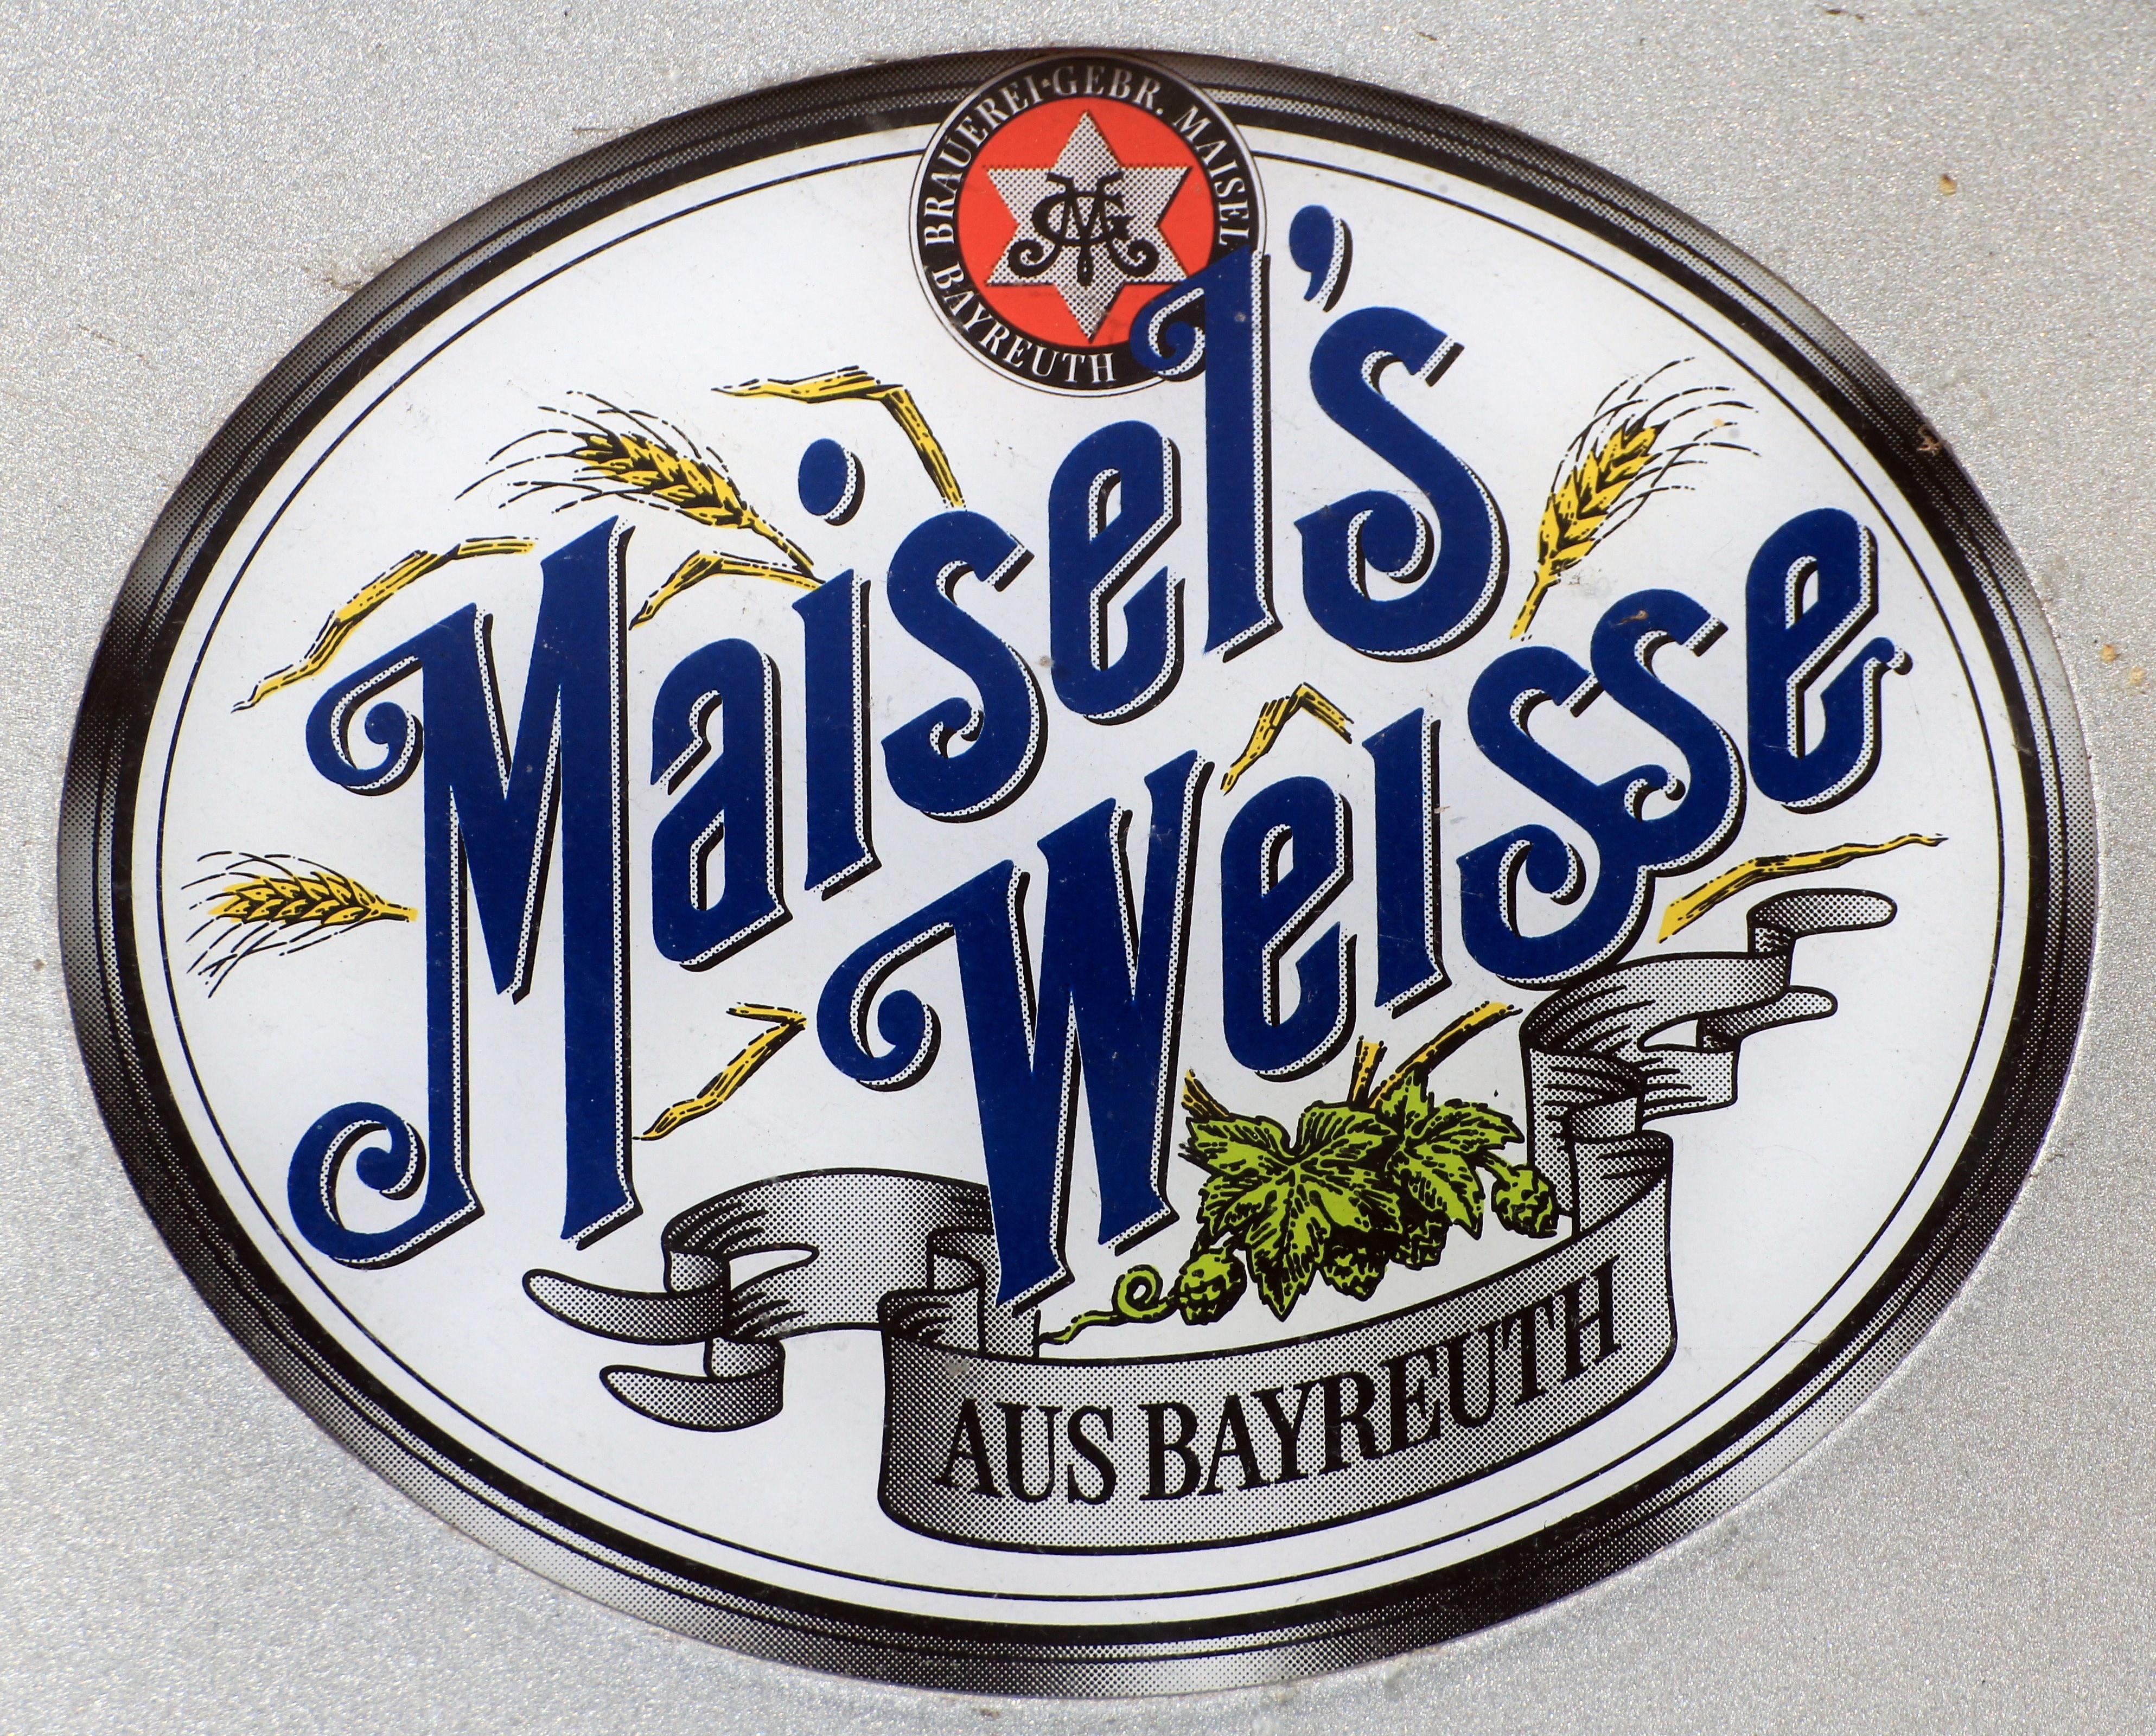 maisel's welsee aus bayreuth